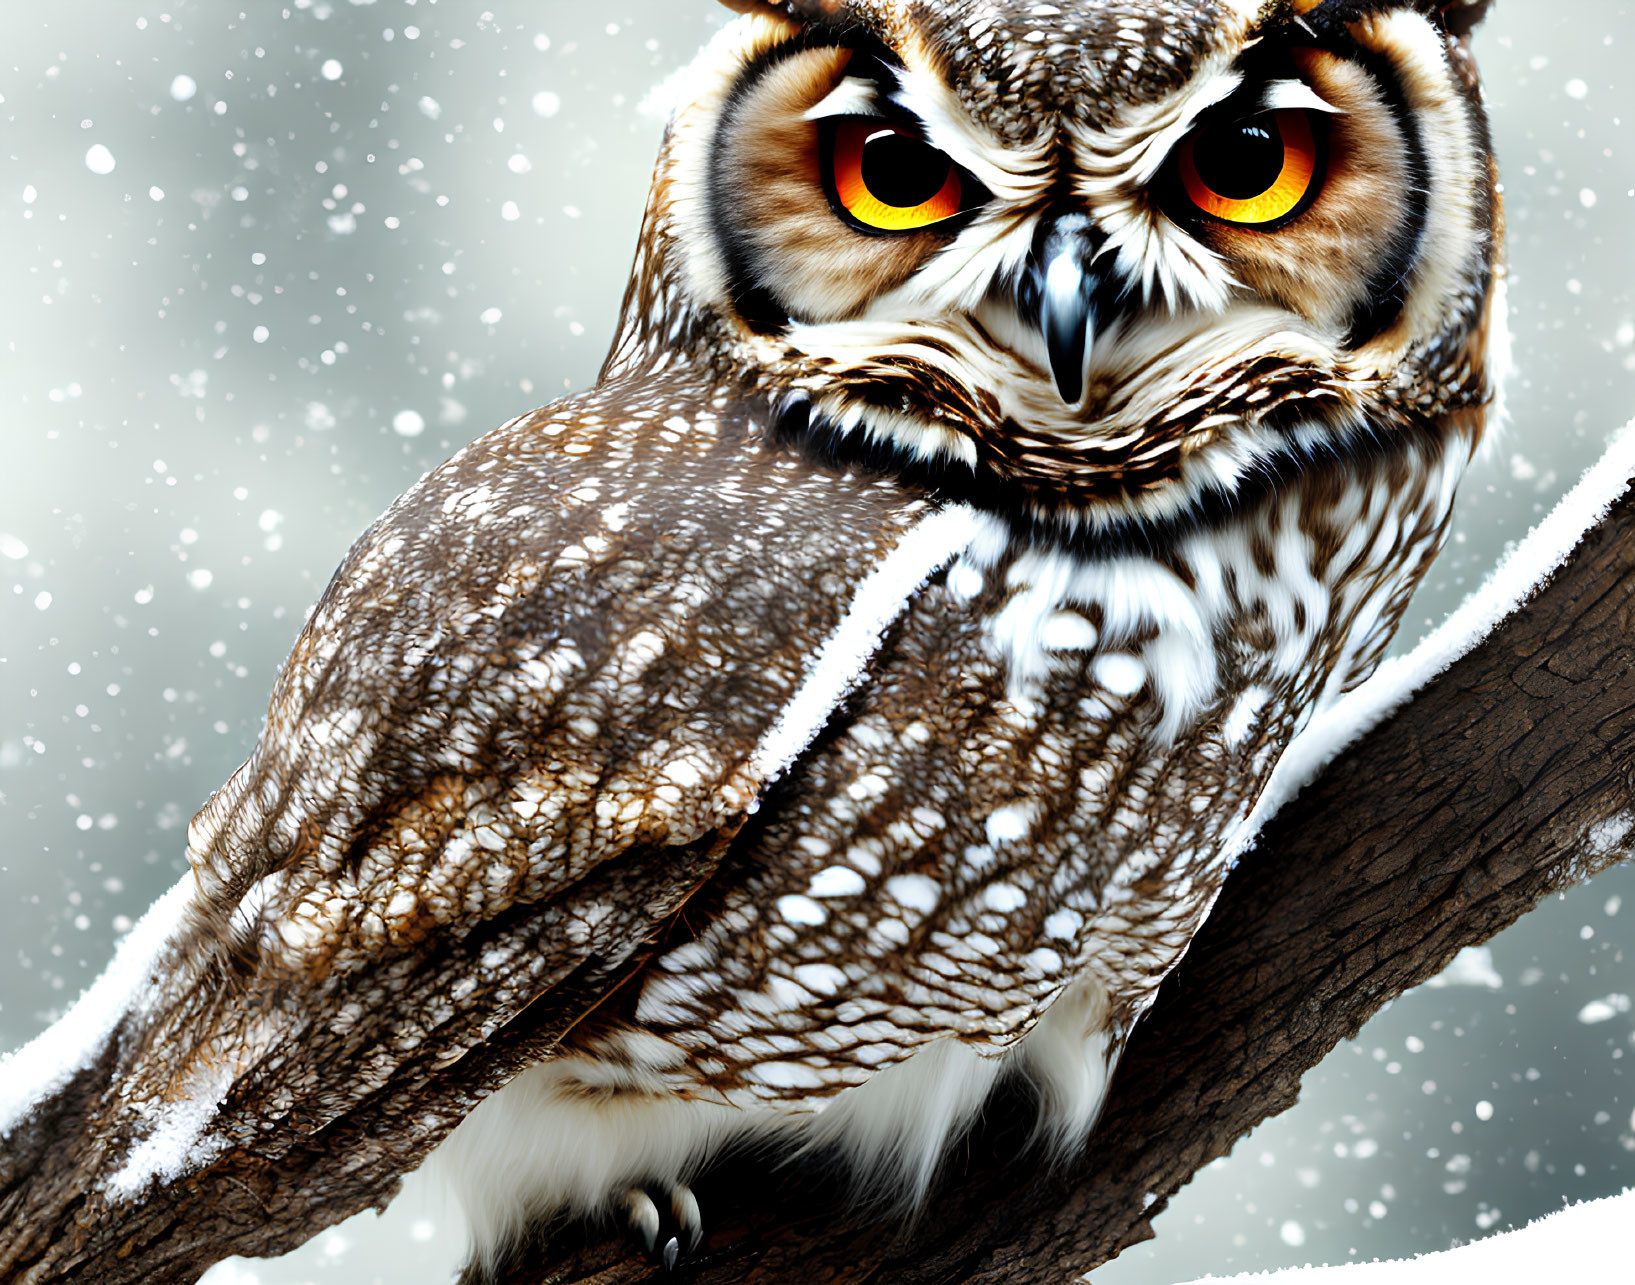 Brown and White Speckled Owl Perched on Branch in Falling Snowflakes